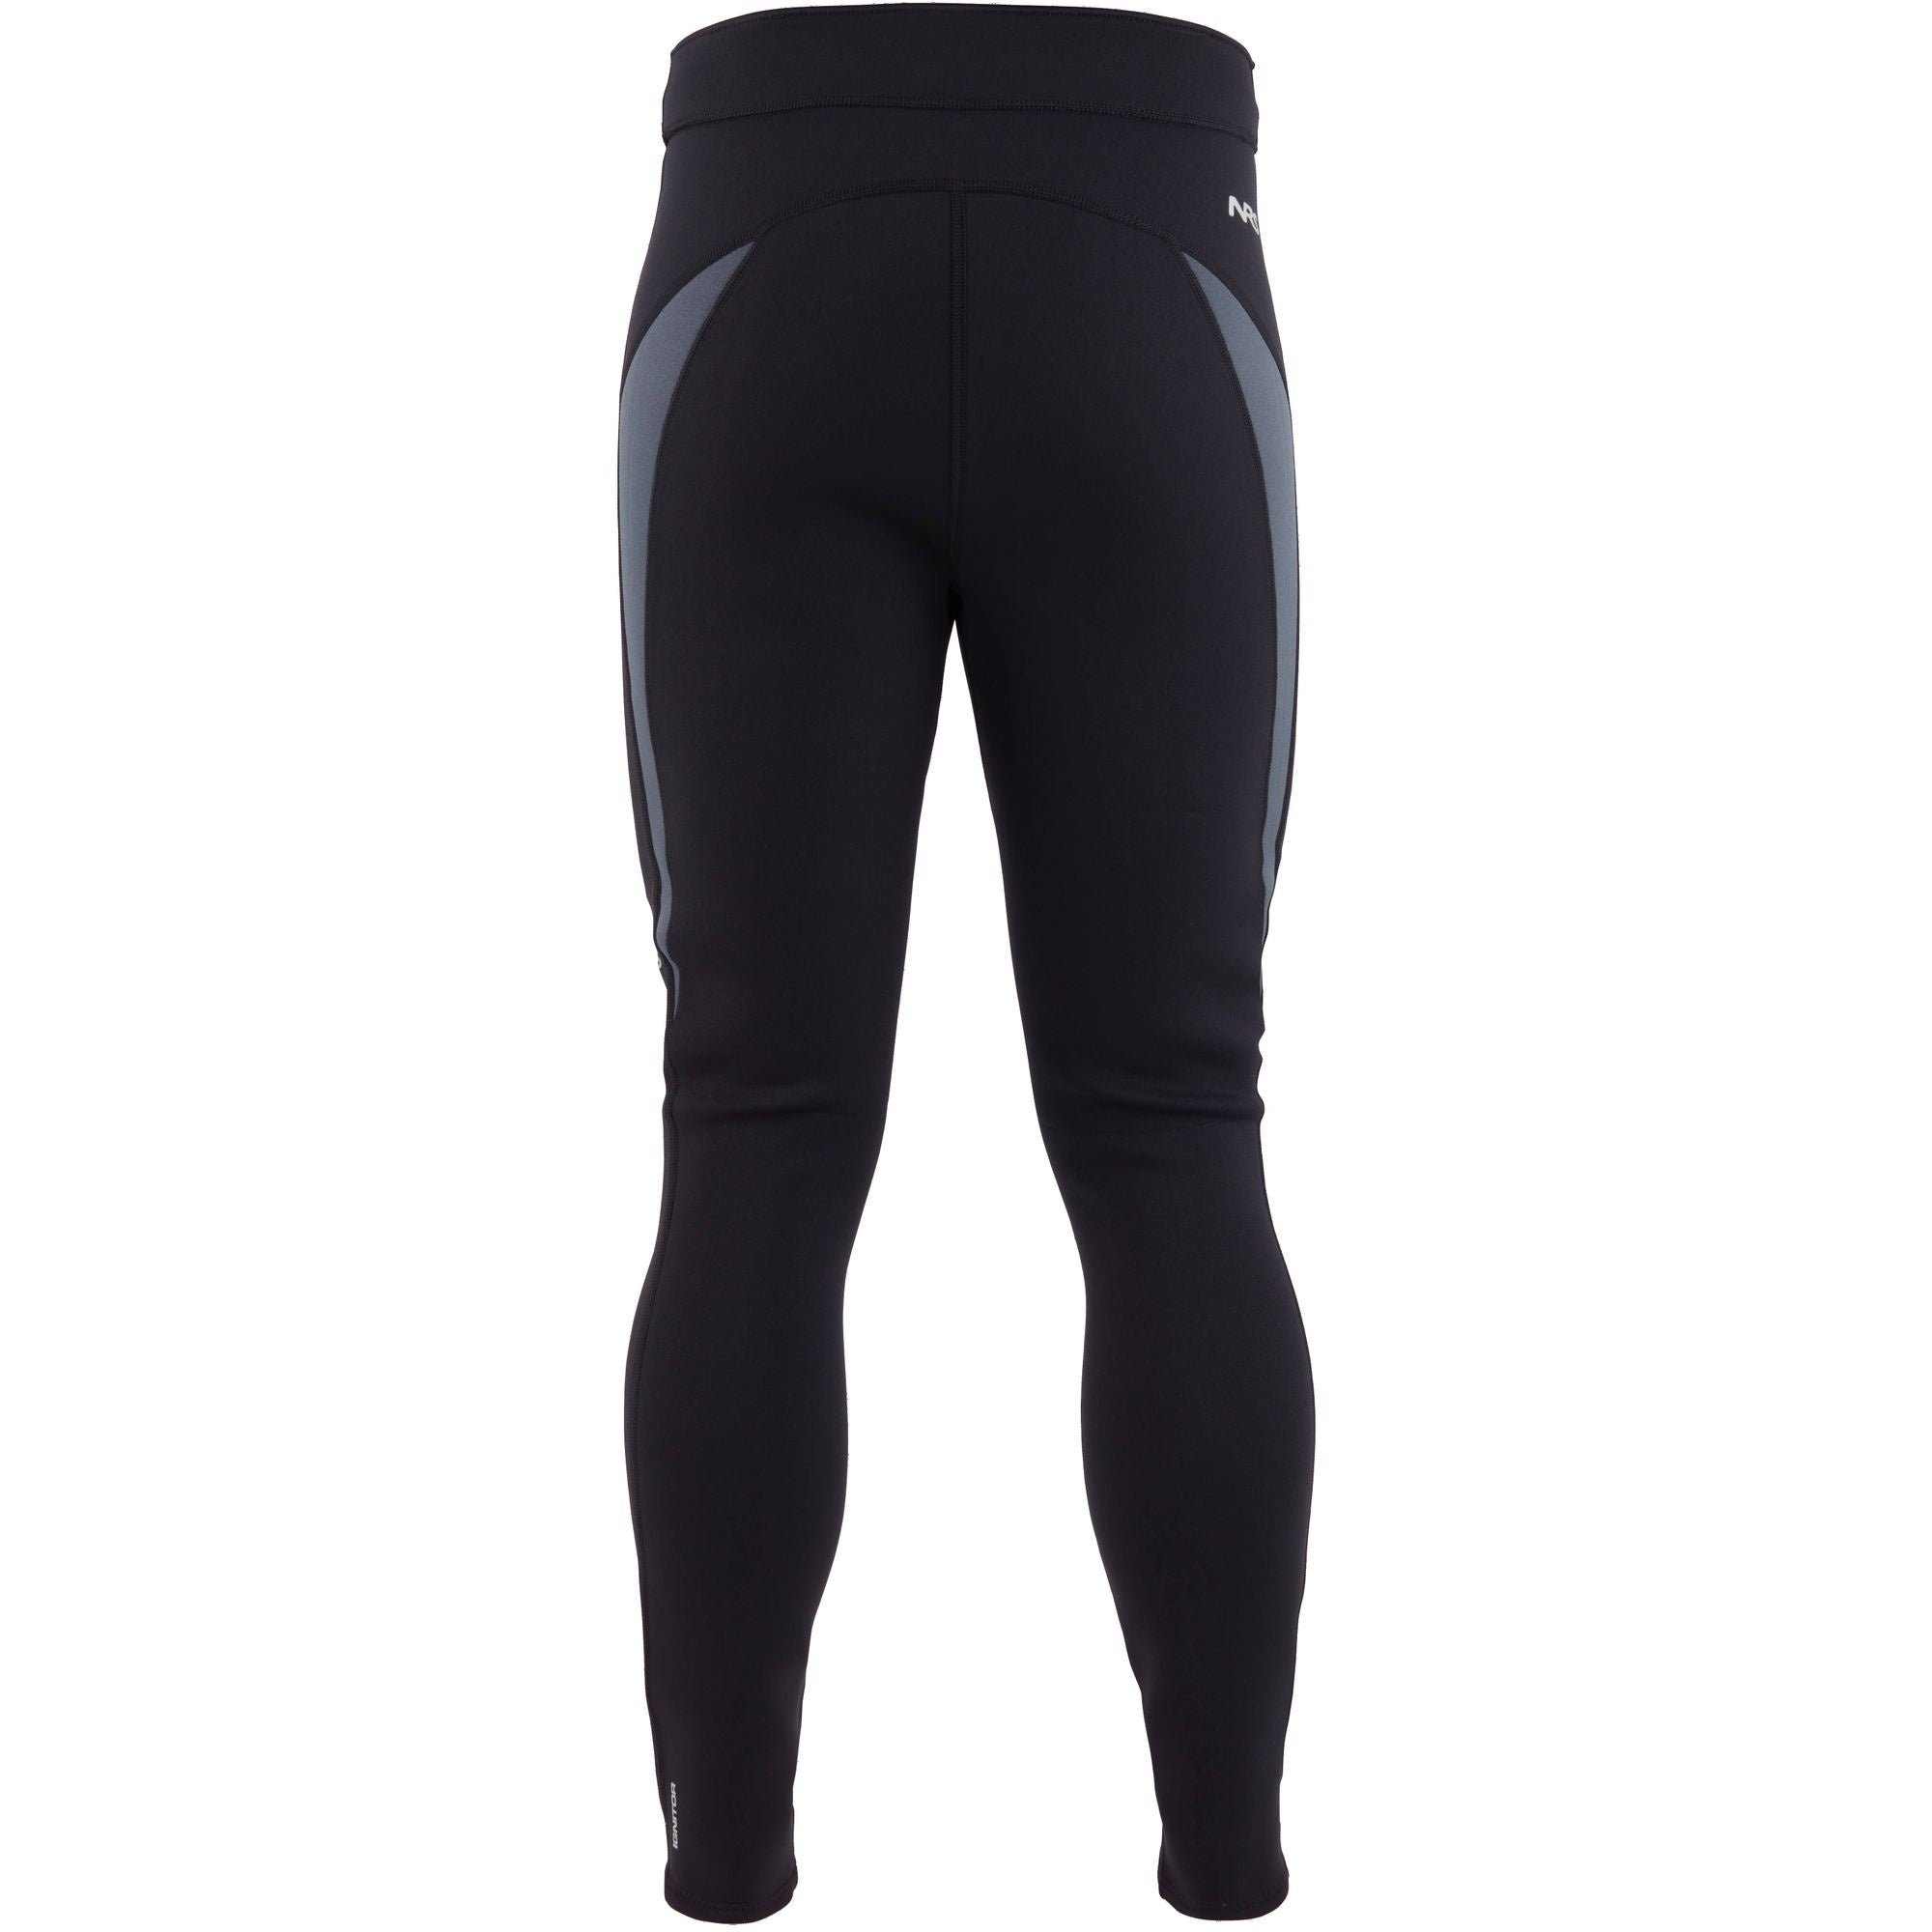 NRS - Men's Ignitor Pant